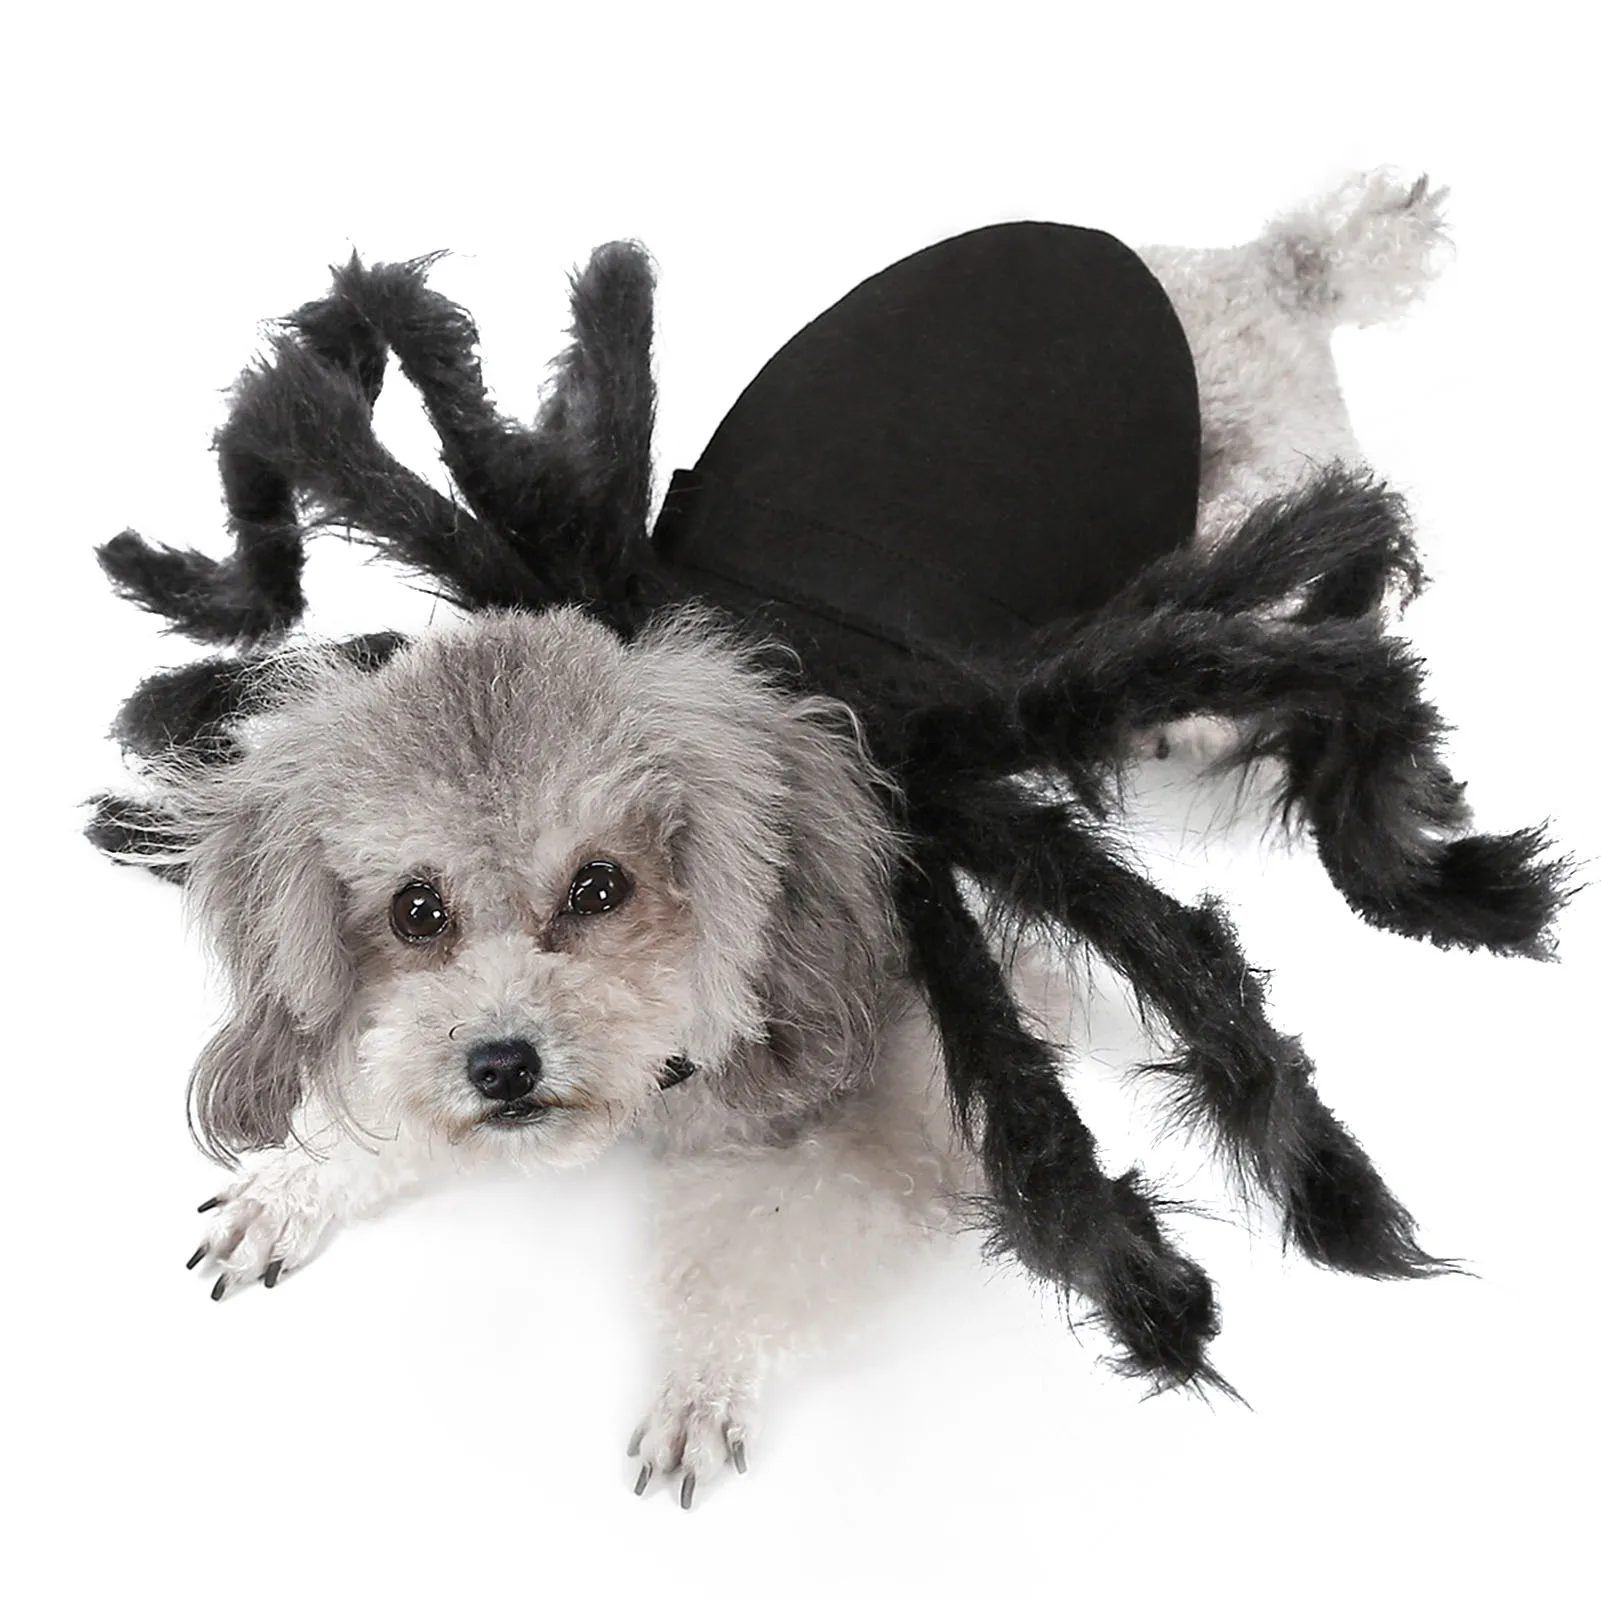 Dogs Cats Spider Costume Pet Party Outfits for Small Dogs Cats Halloween decoration scare cosume party supplies